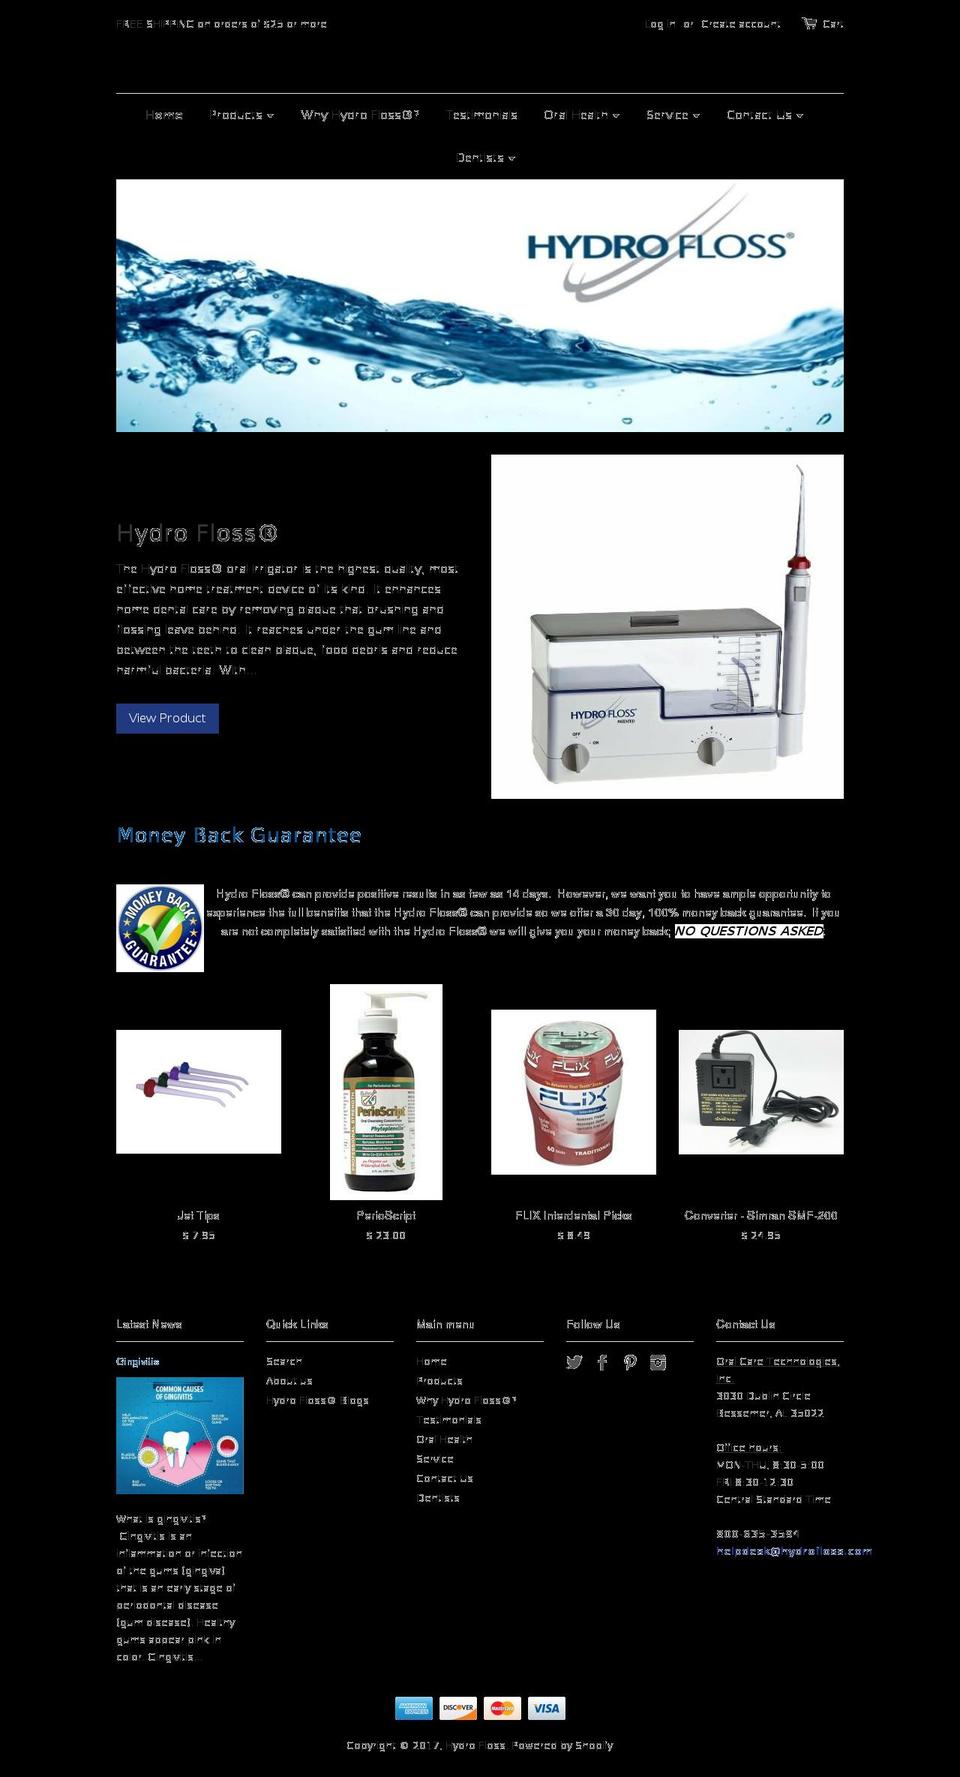 Startup Shopify theme site example hydrofloss.com